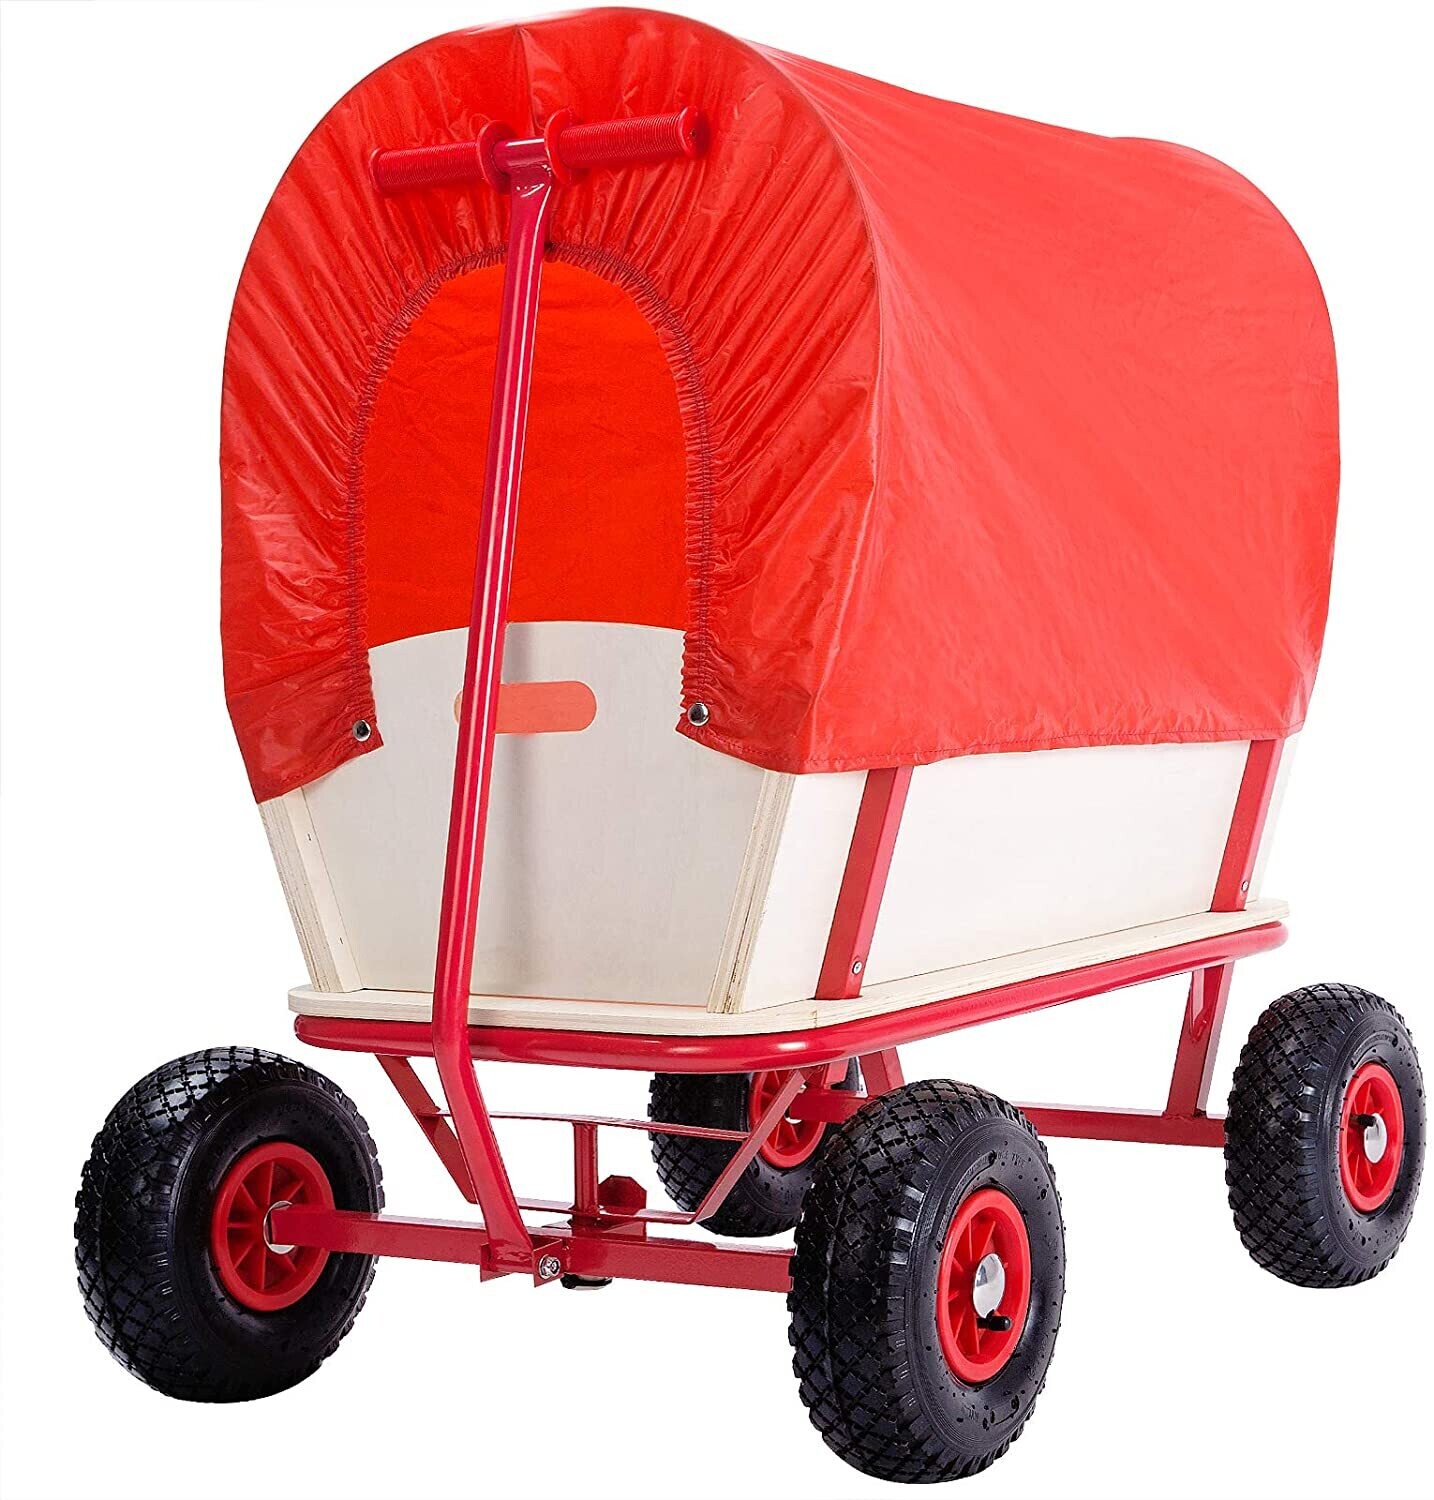 Handcart Wood 180 kg - 4 Profile Pneumatic Tyres Hand Trolley Transport Trolley All-Round Steel Tube Frame Red Garden Trolley